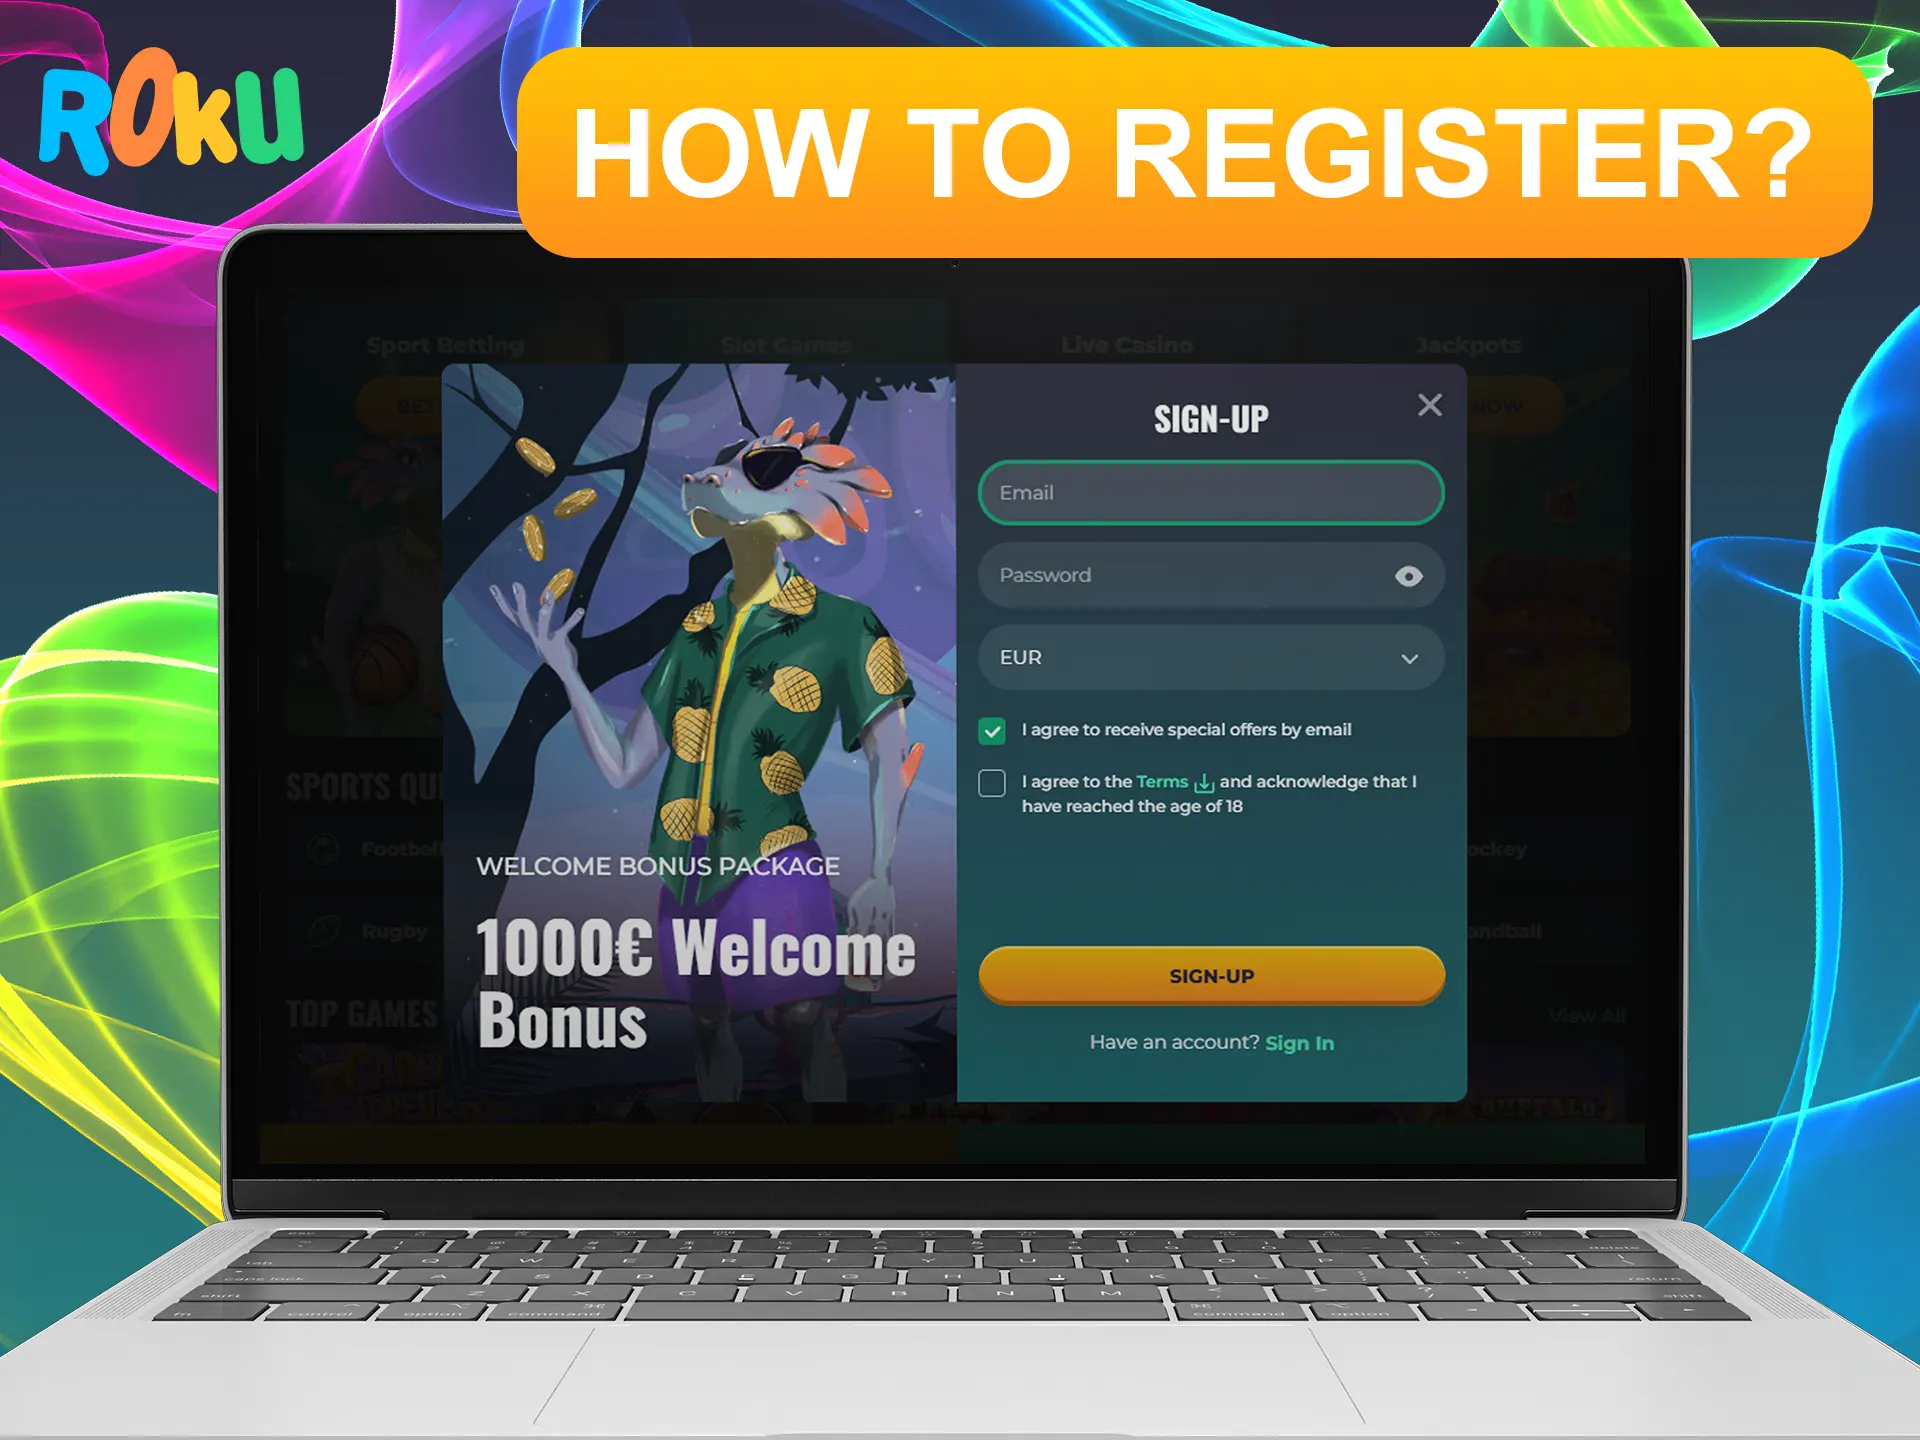 Register your own Rokubet account on special page.